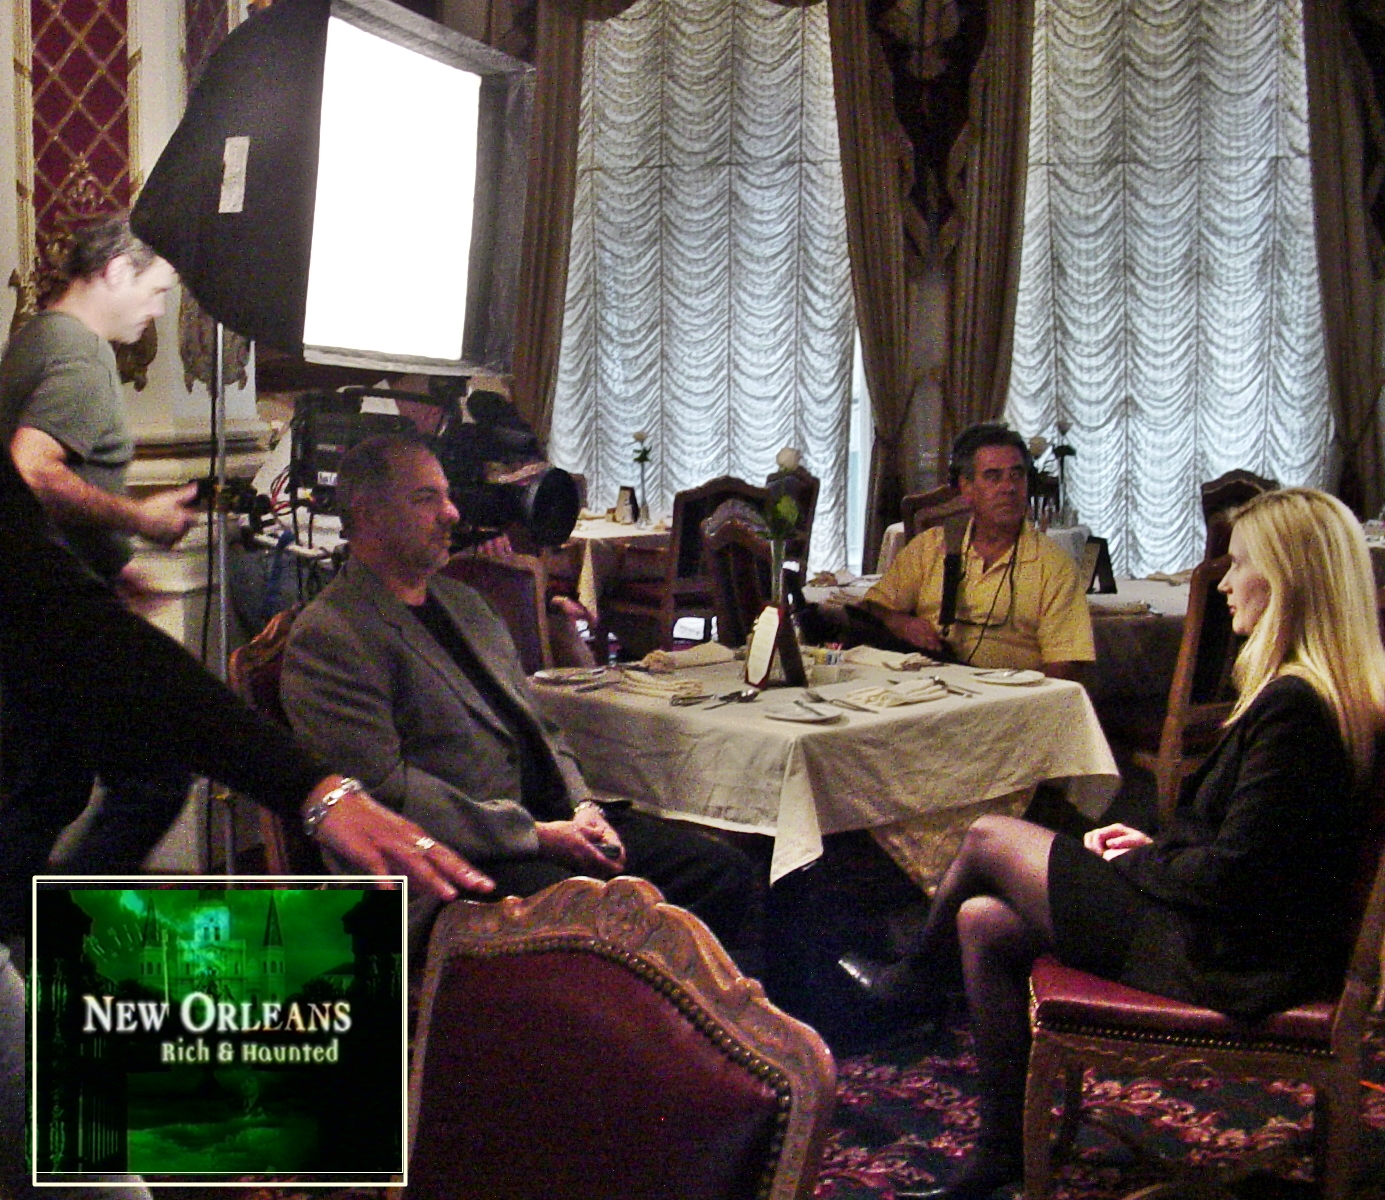 March 2003, Larry Montz filming interviews at Le Pavillon Hotel for ISPR's 